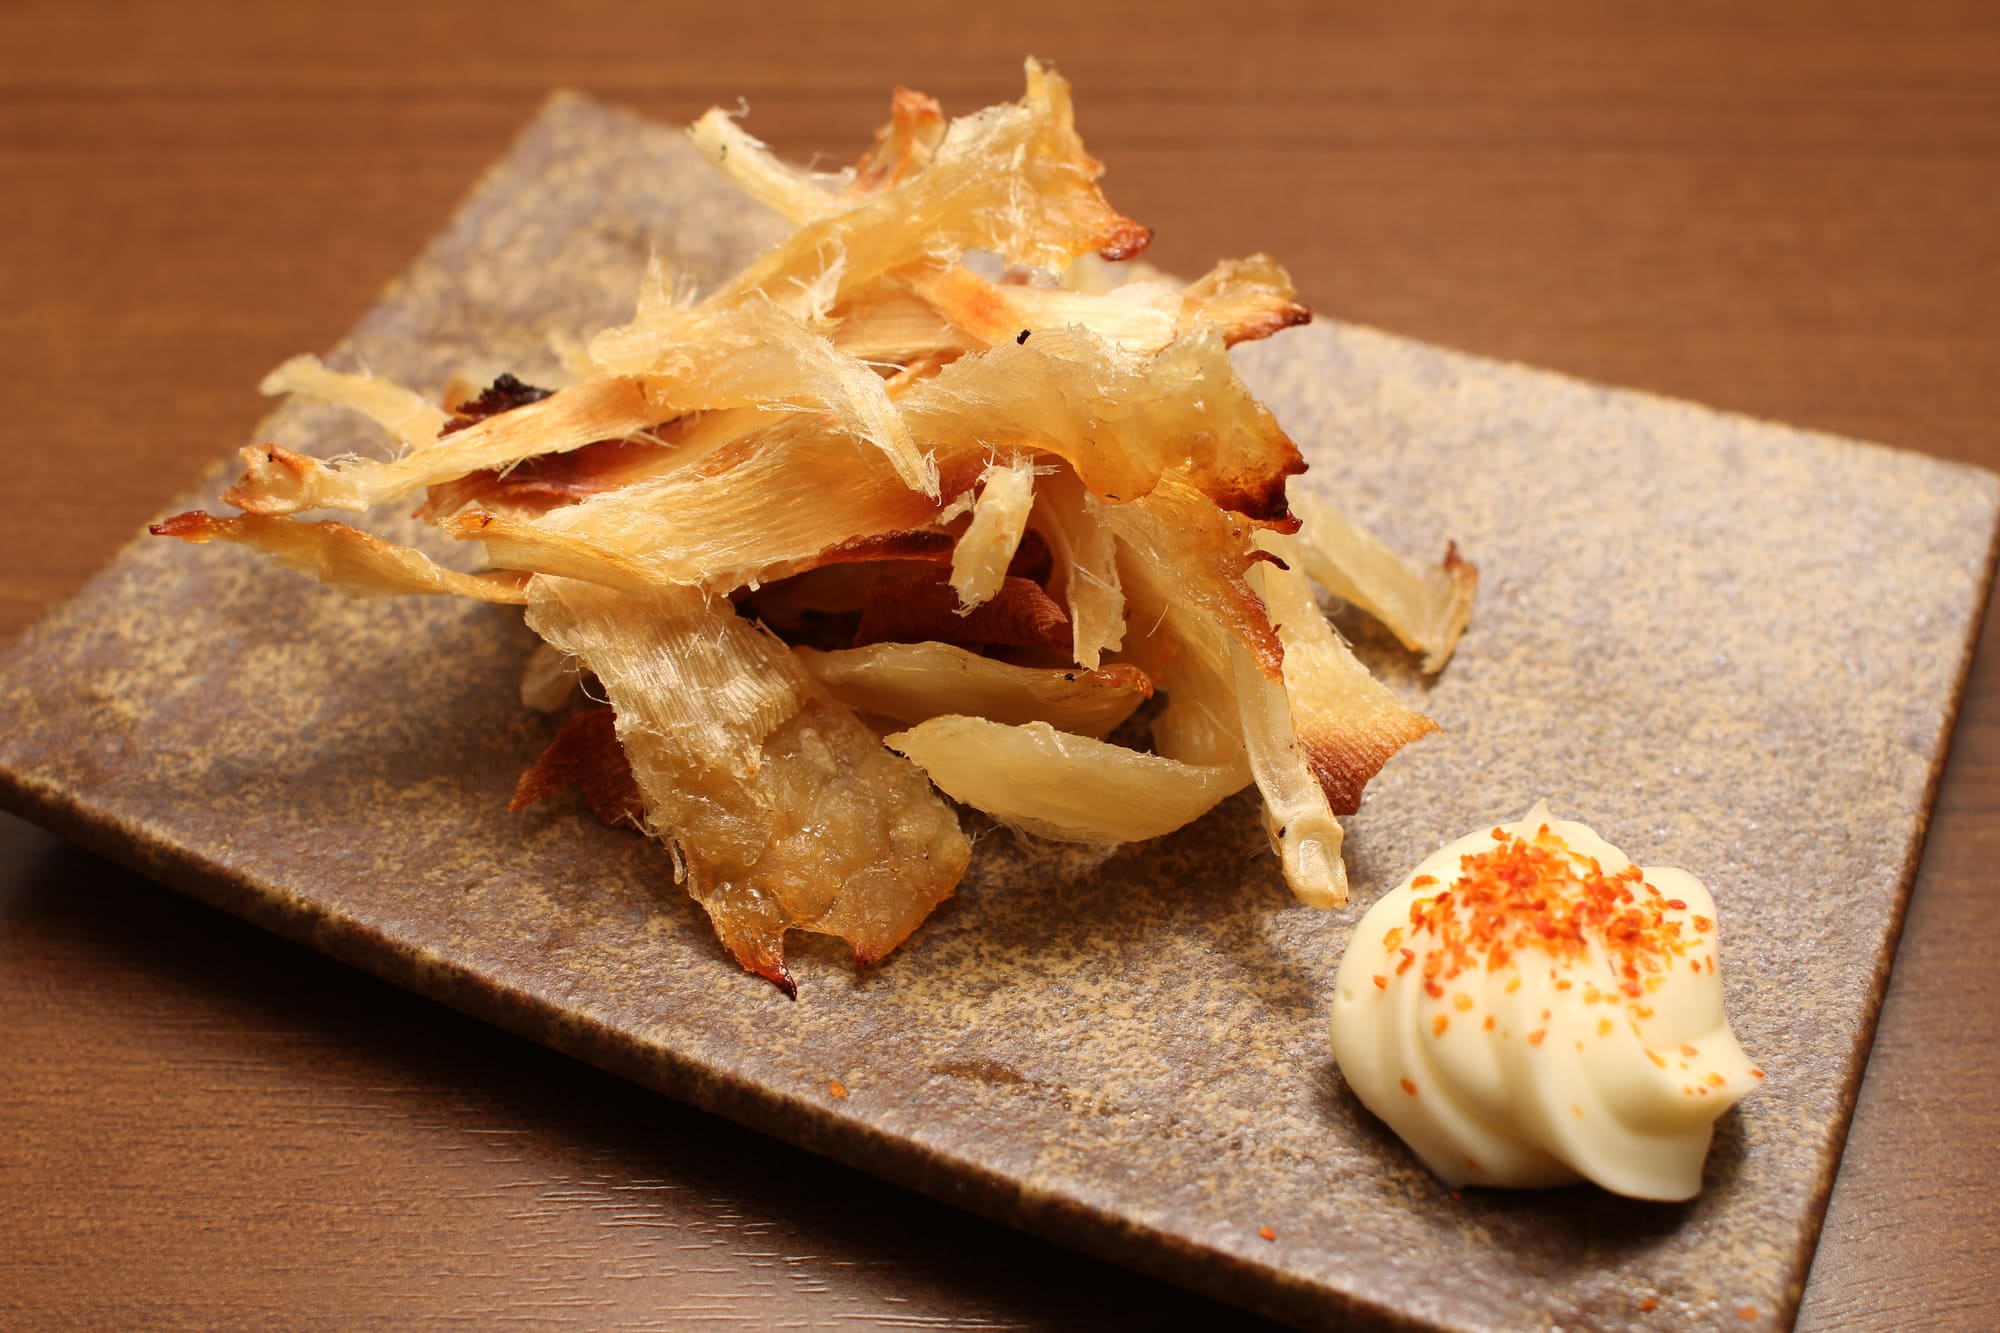 A Must Try Menu At Izakaya A Pub And Bar In Tokyo Seafood Cuisine W Photos